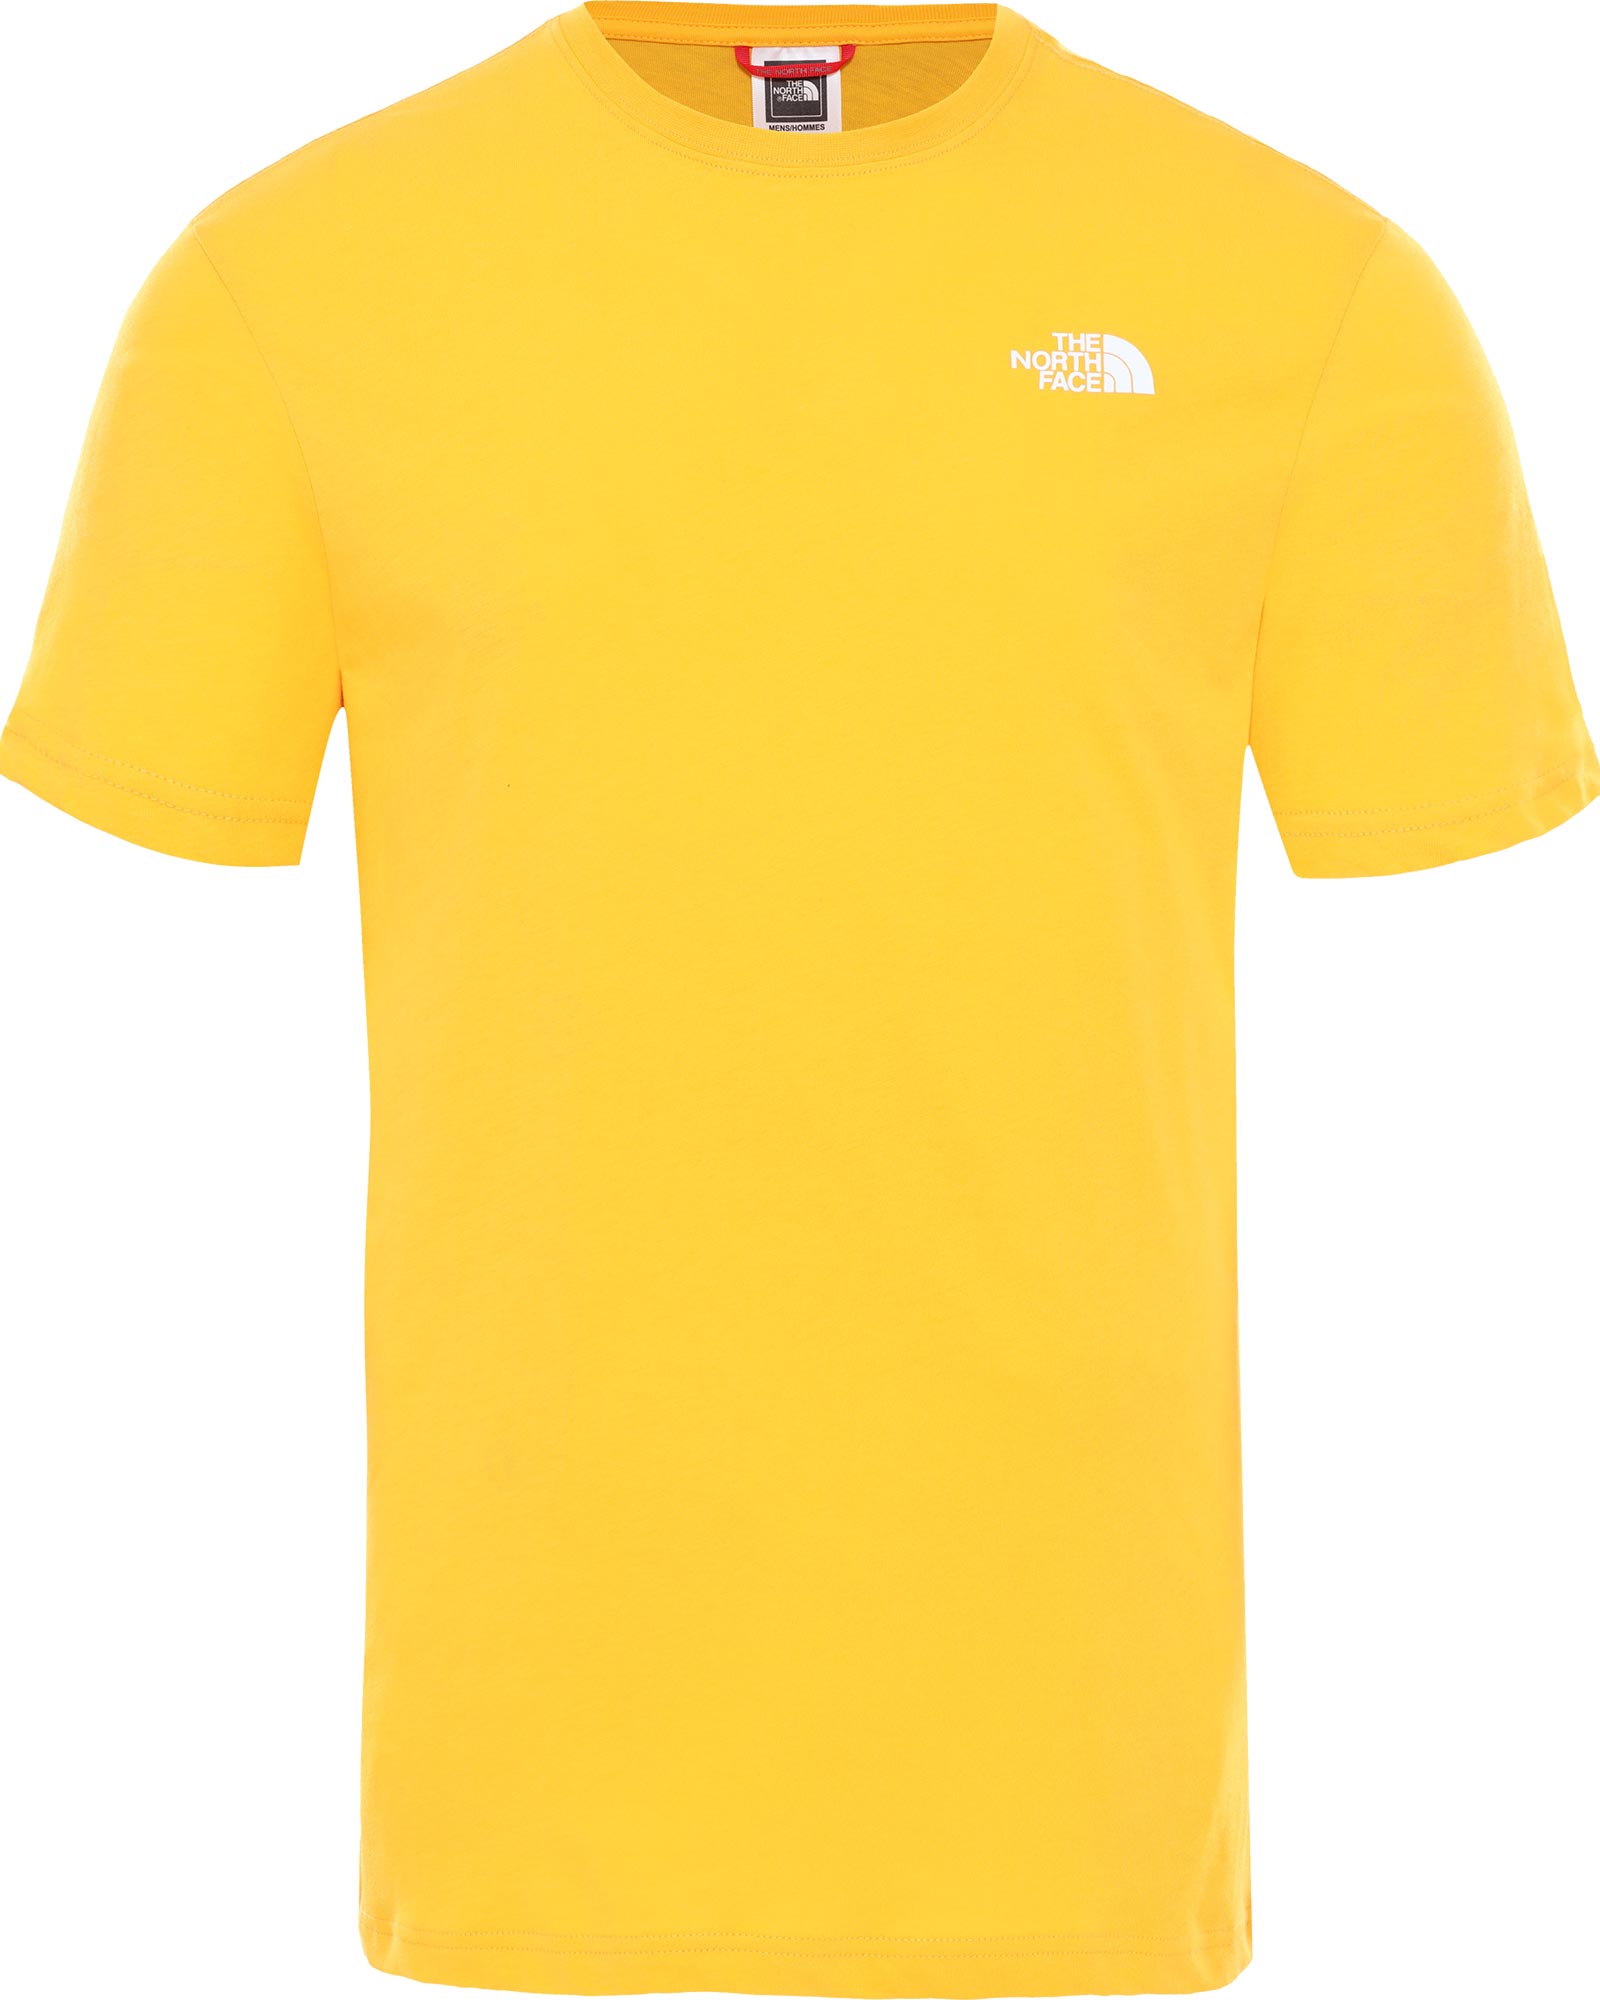 The North Face Red Box Men’s T Shirt - Summit Gold XS